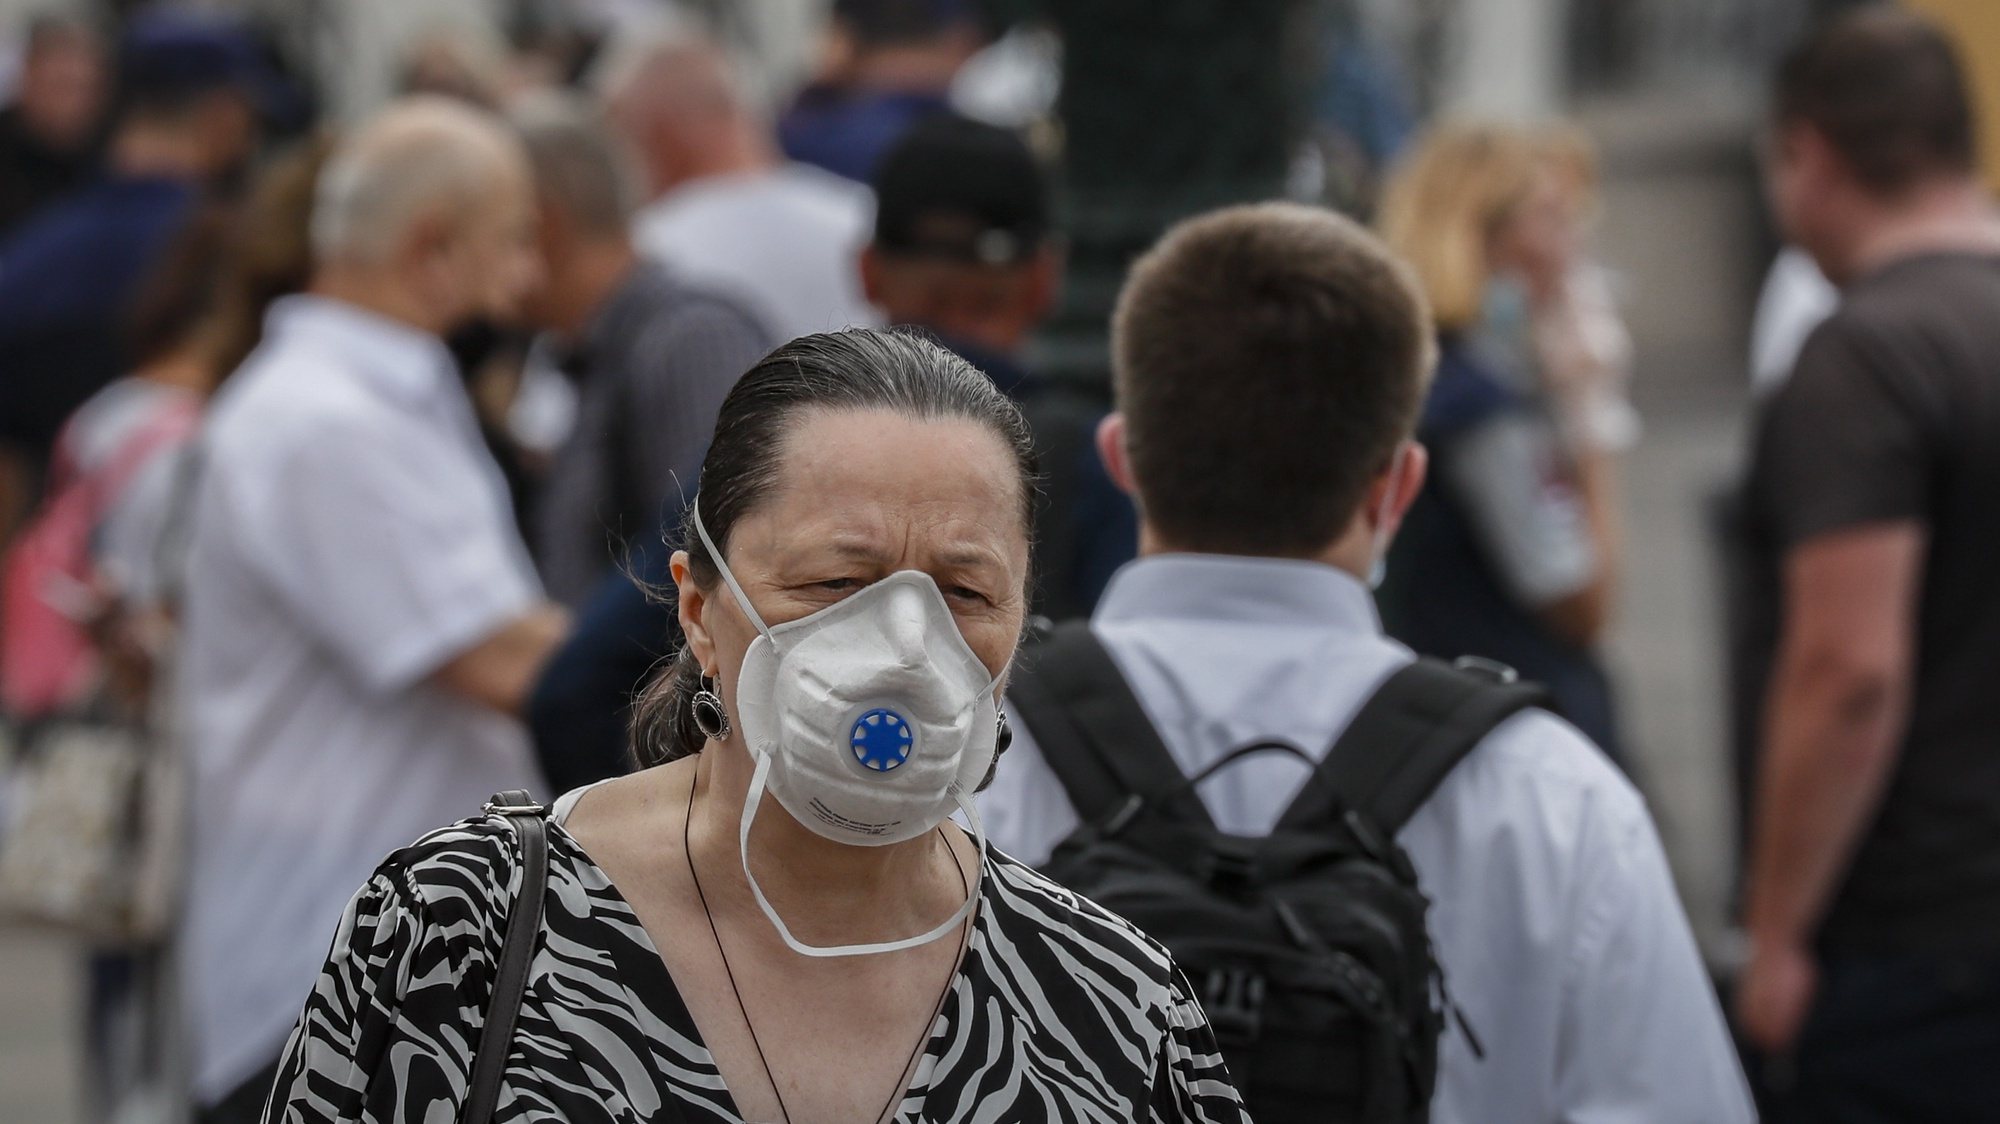 epa09380264 Russian woman wearing a protective face mask on the street in Moscow, Russia 30 July 2021. Moscow Mayor Sergei Sobyanin has canceled the obligation to wear gloves in public places. At the same time, wearing masks remain mandatory during Covid-19 pandemic.  EPA/YURI KOCHETKOV